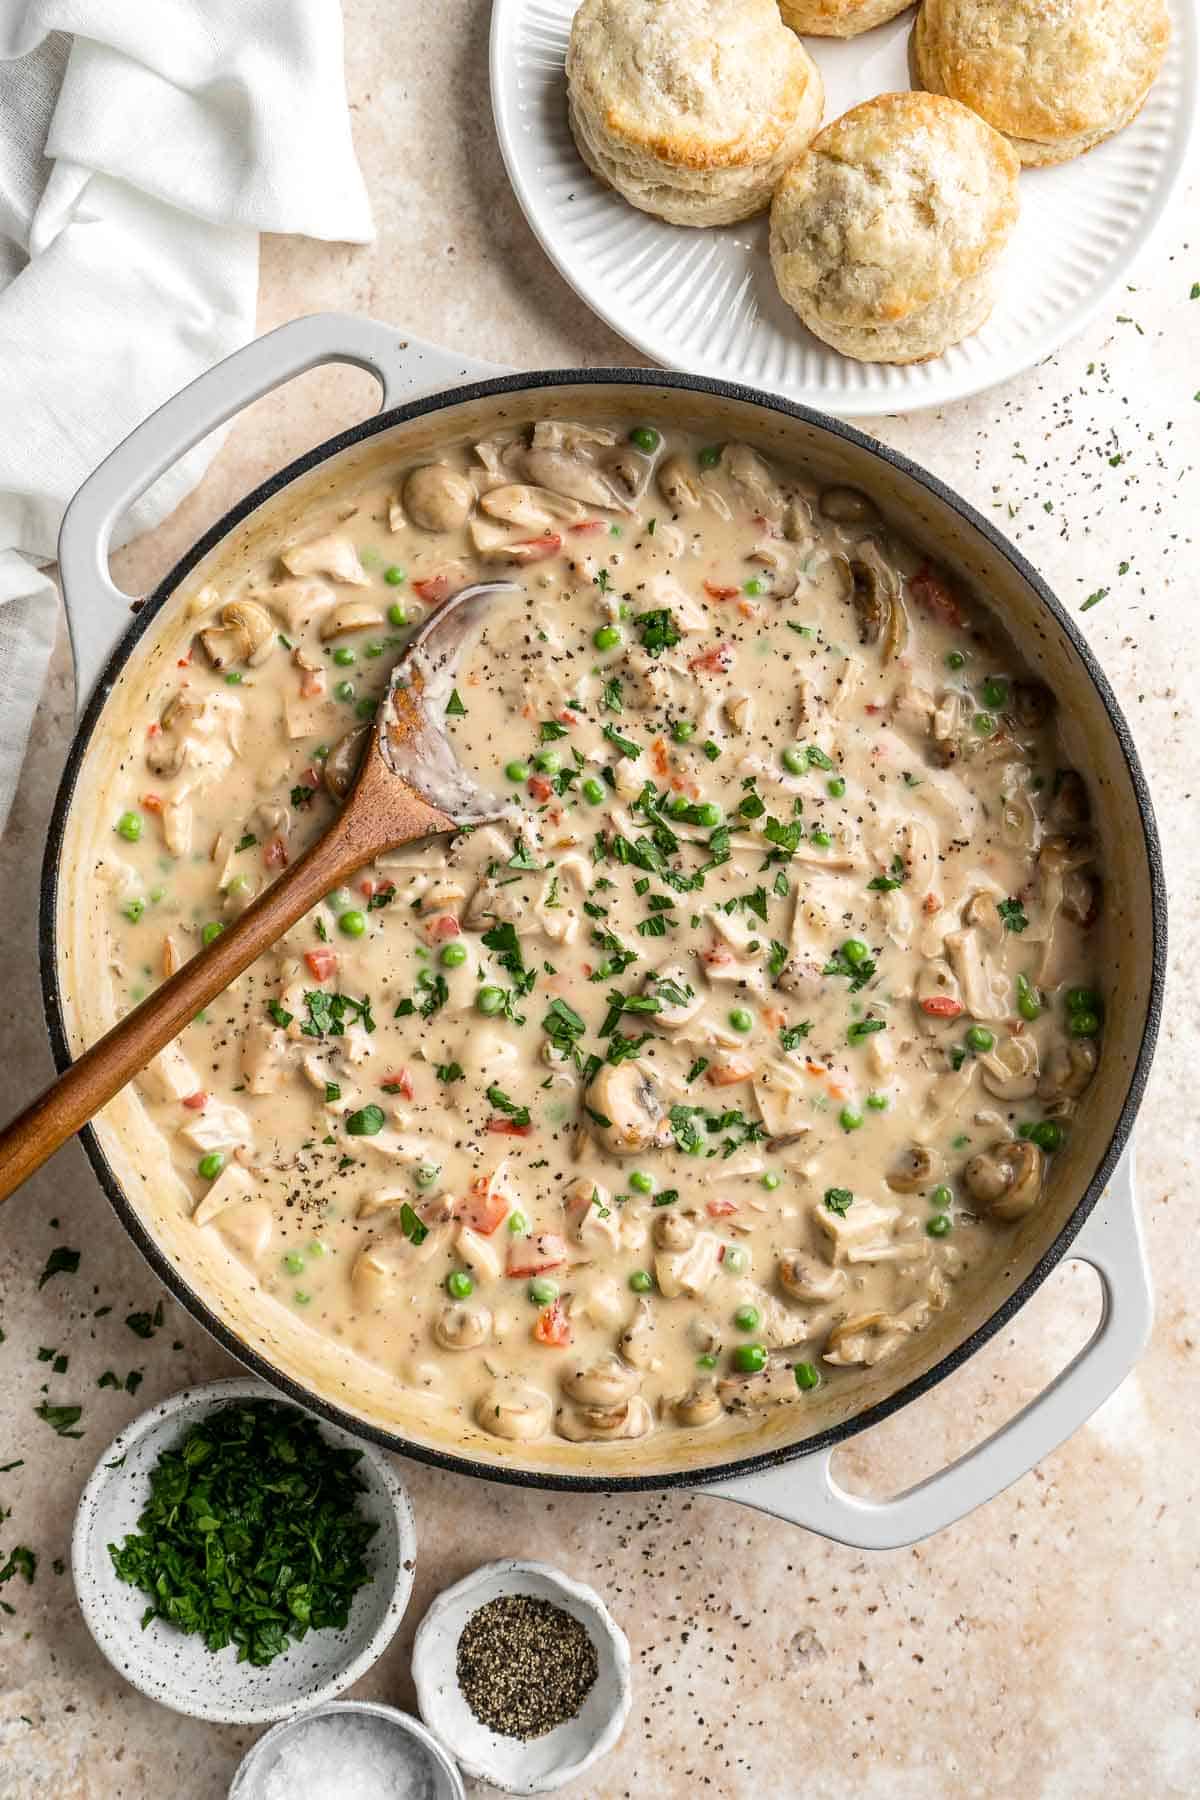 Chicken a la King is rich, creamy, and hearty comfort food. This 30-minute dinner recipe contains chicken and veggies in a cream sauce made from scratch. | aheadofthyme.com